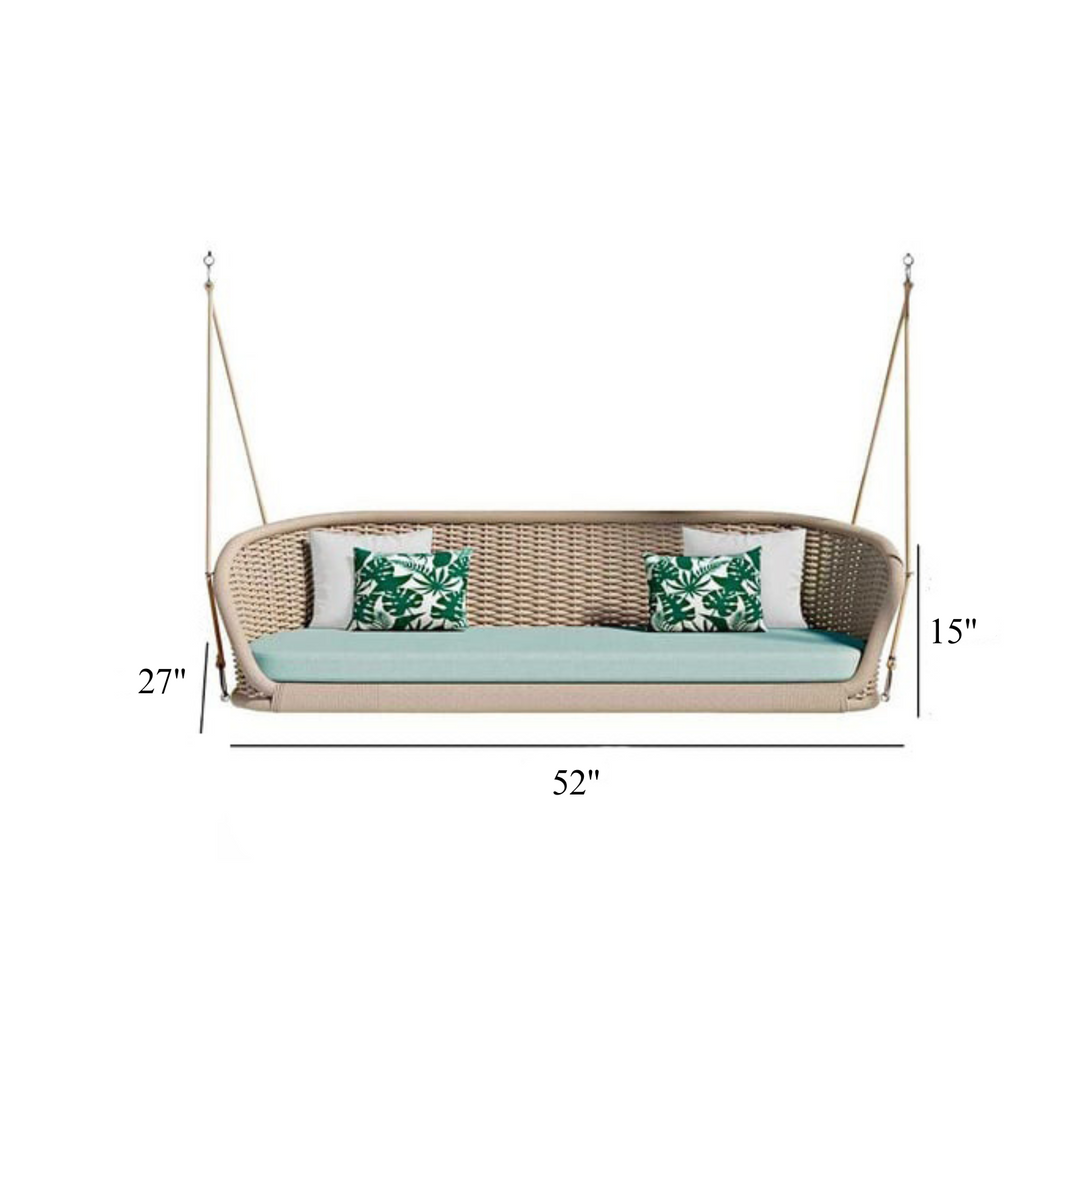 Hoshin Double Seater Hanging Swing Without Stand For Balcony , Garden Swing (Cream) Braided & Rope